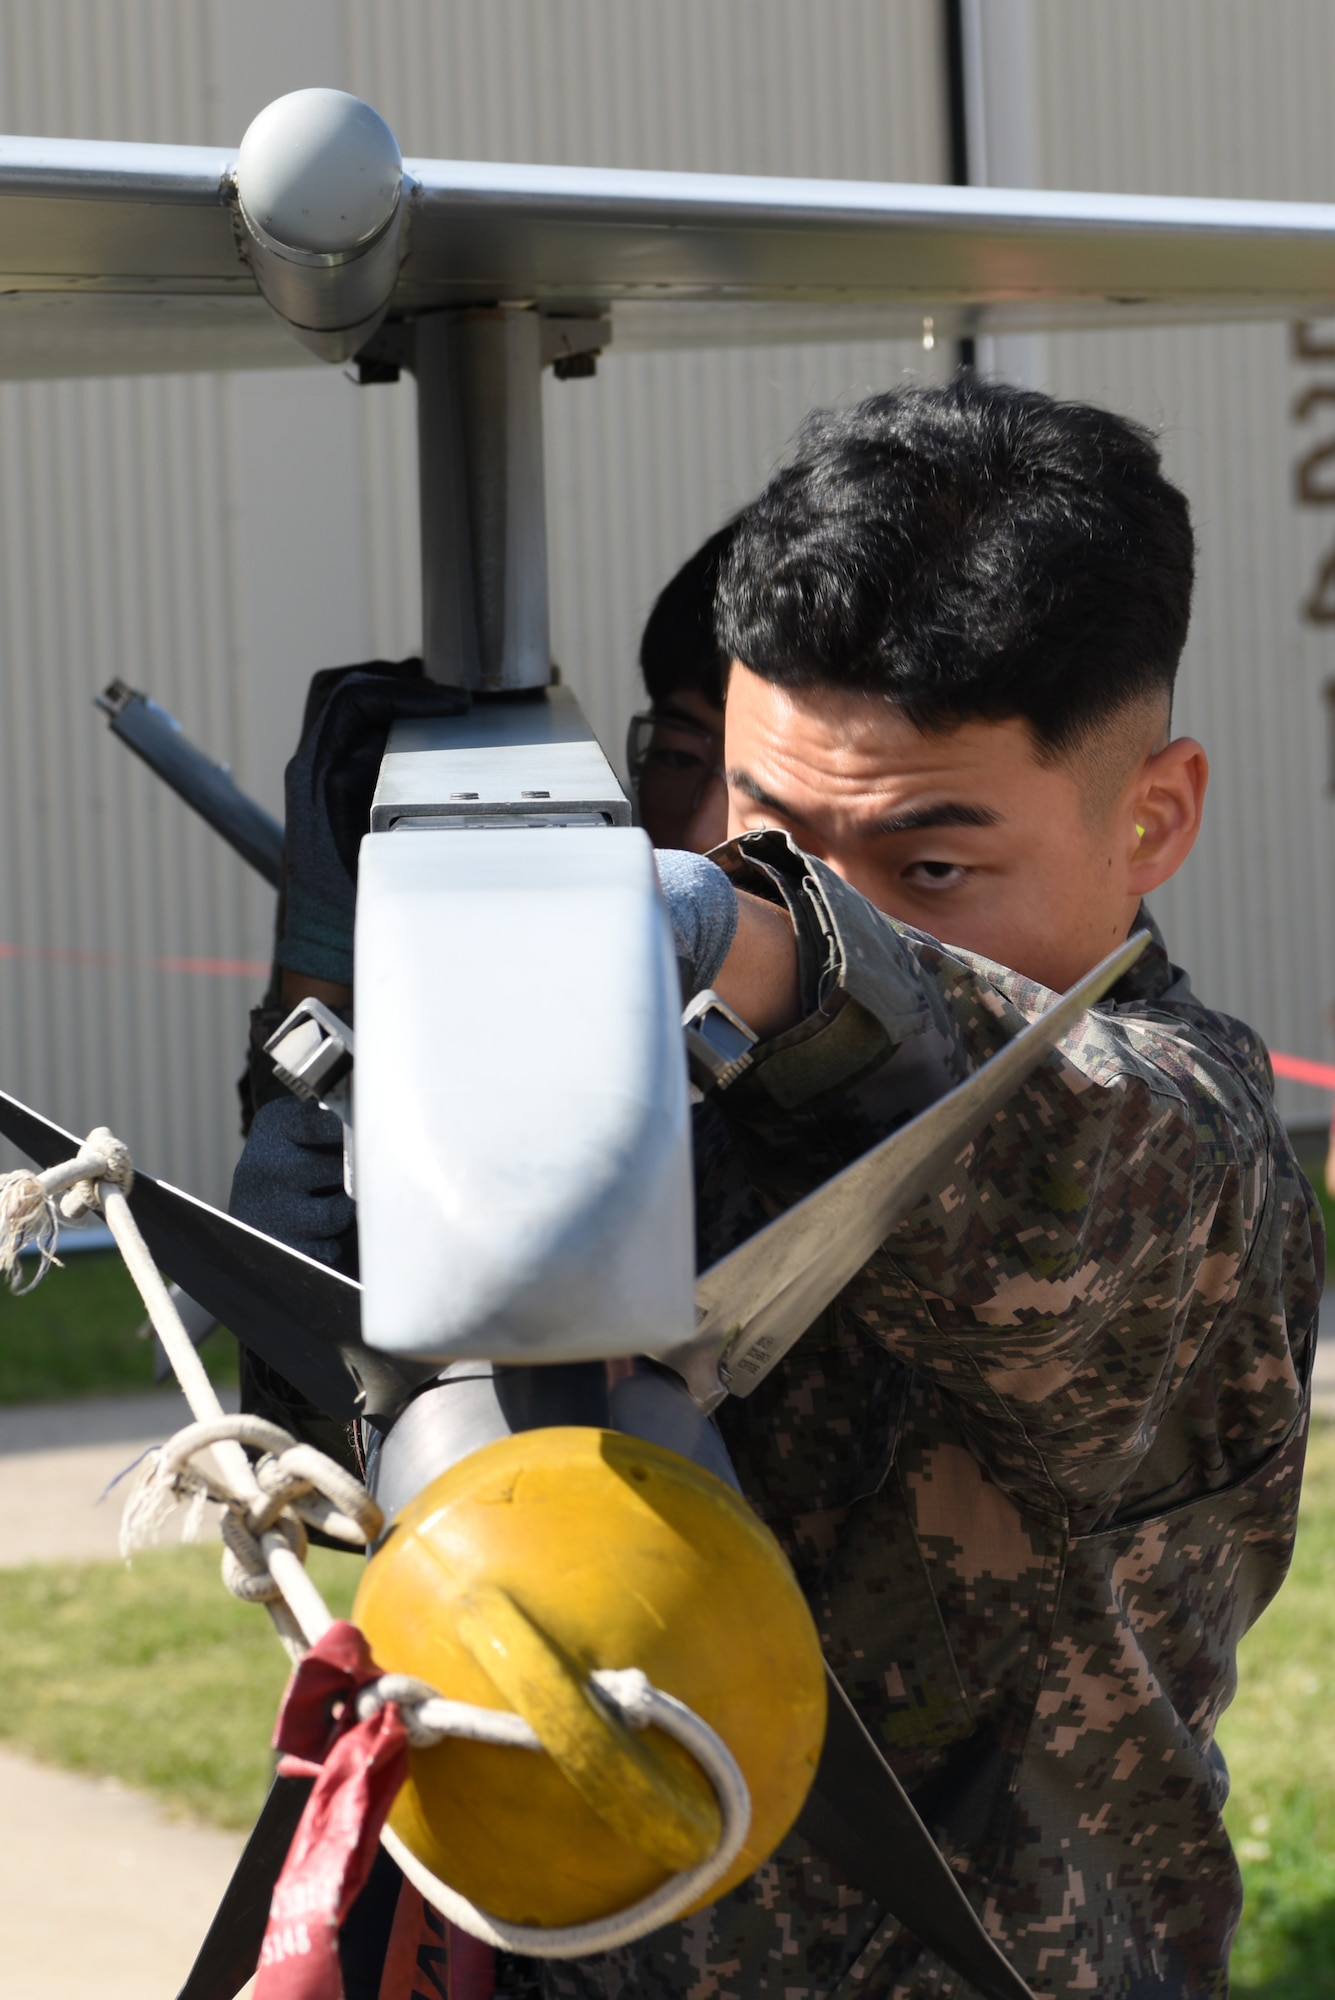 Members of the Republic of Korea air force’s 38th Fighter Group Aircraft Maintenance Unit load a missile onto a KF-16 Fighting Falcon aircraft during the 2019 Penn Fest competition at Kunsan Air Base, Republic of Korea, Oct. 19, 2019. The 38th FG AMU competed against four U.S. Air Force teams and completed their loads with the second quickest times. (U.S. Air Force photo by Staff Sgt. Joshua Edwards)